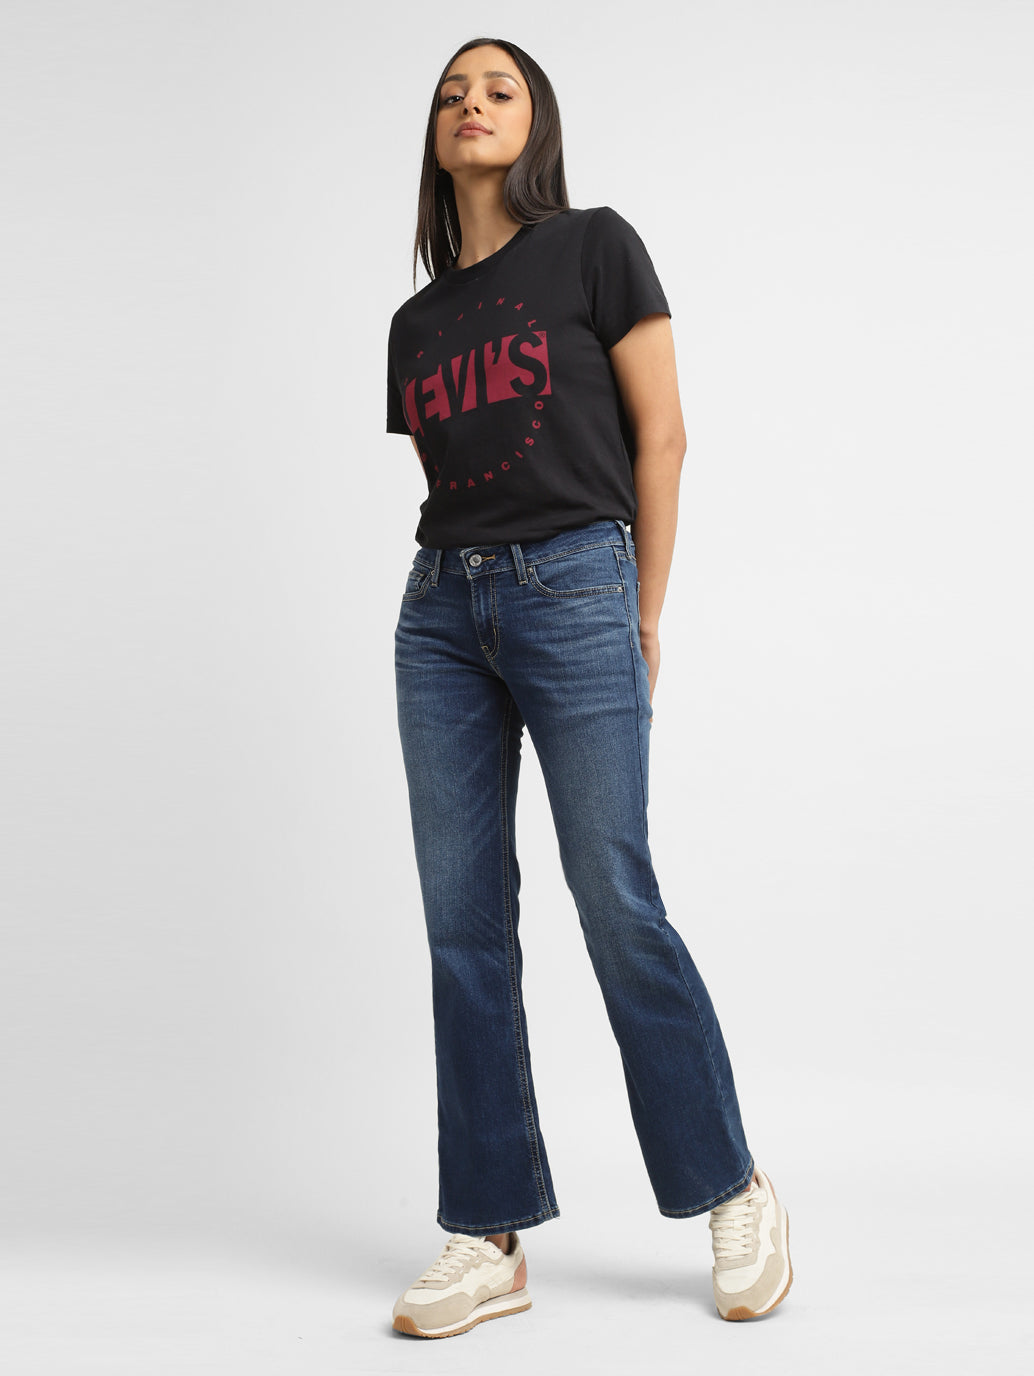 Women's Mid Rise Boot Bootcut Jeans